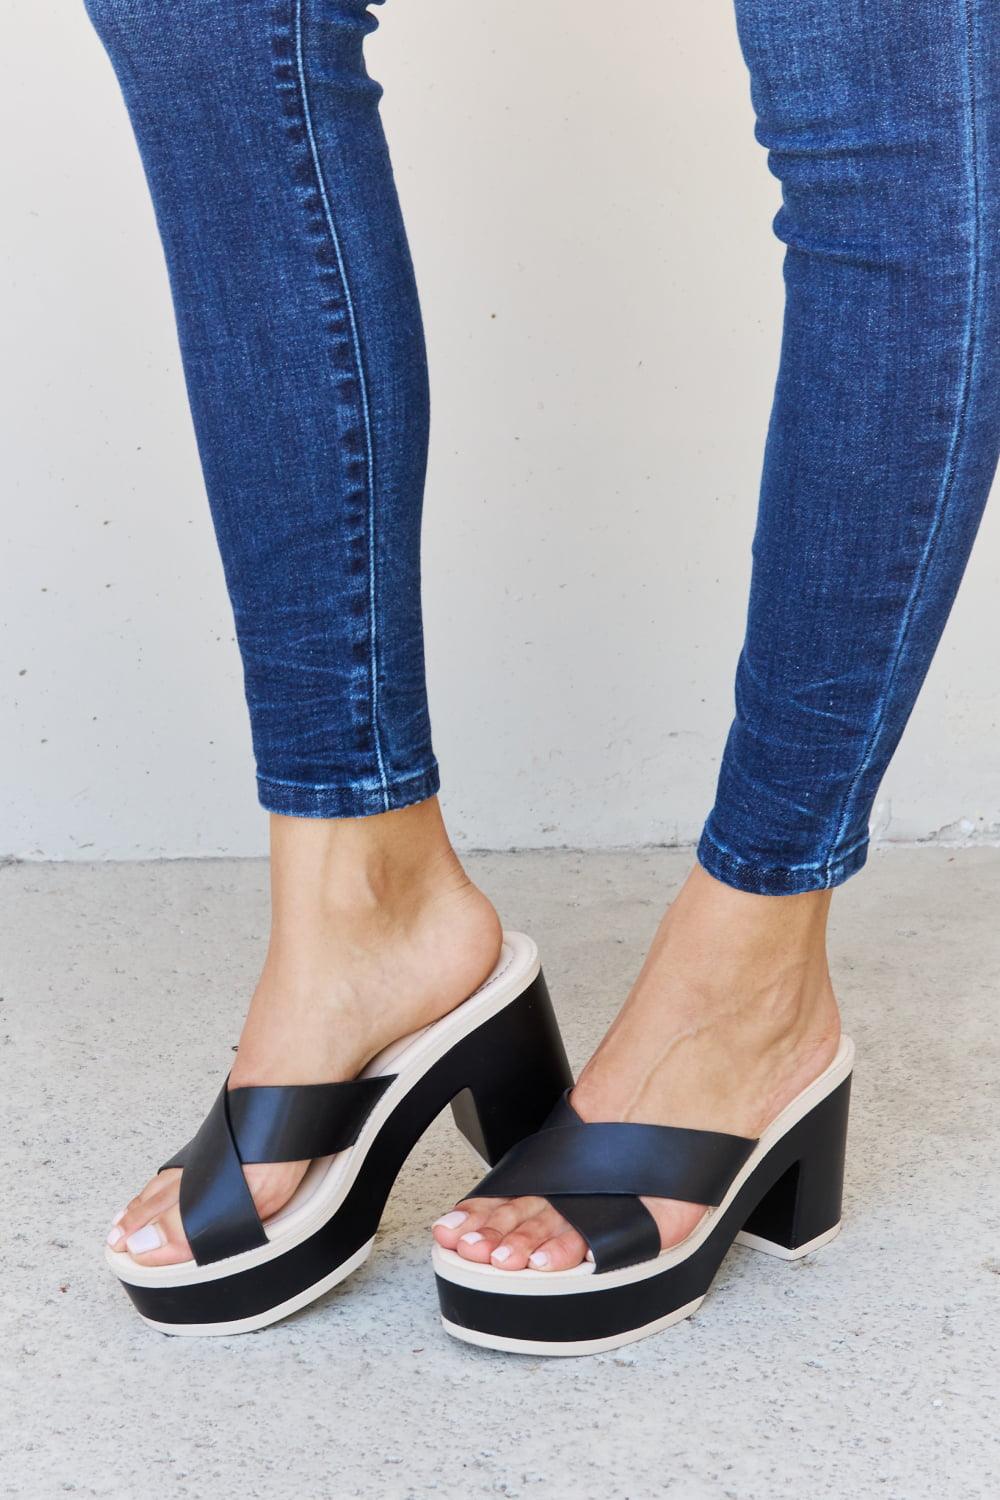 Weeboo Cherish The Moments Contrast Platform Sandals in Black - CADEAUME